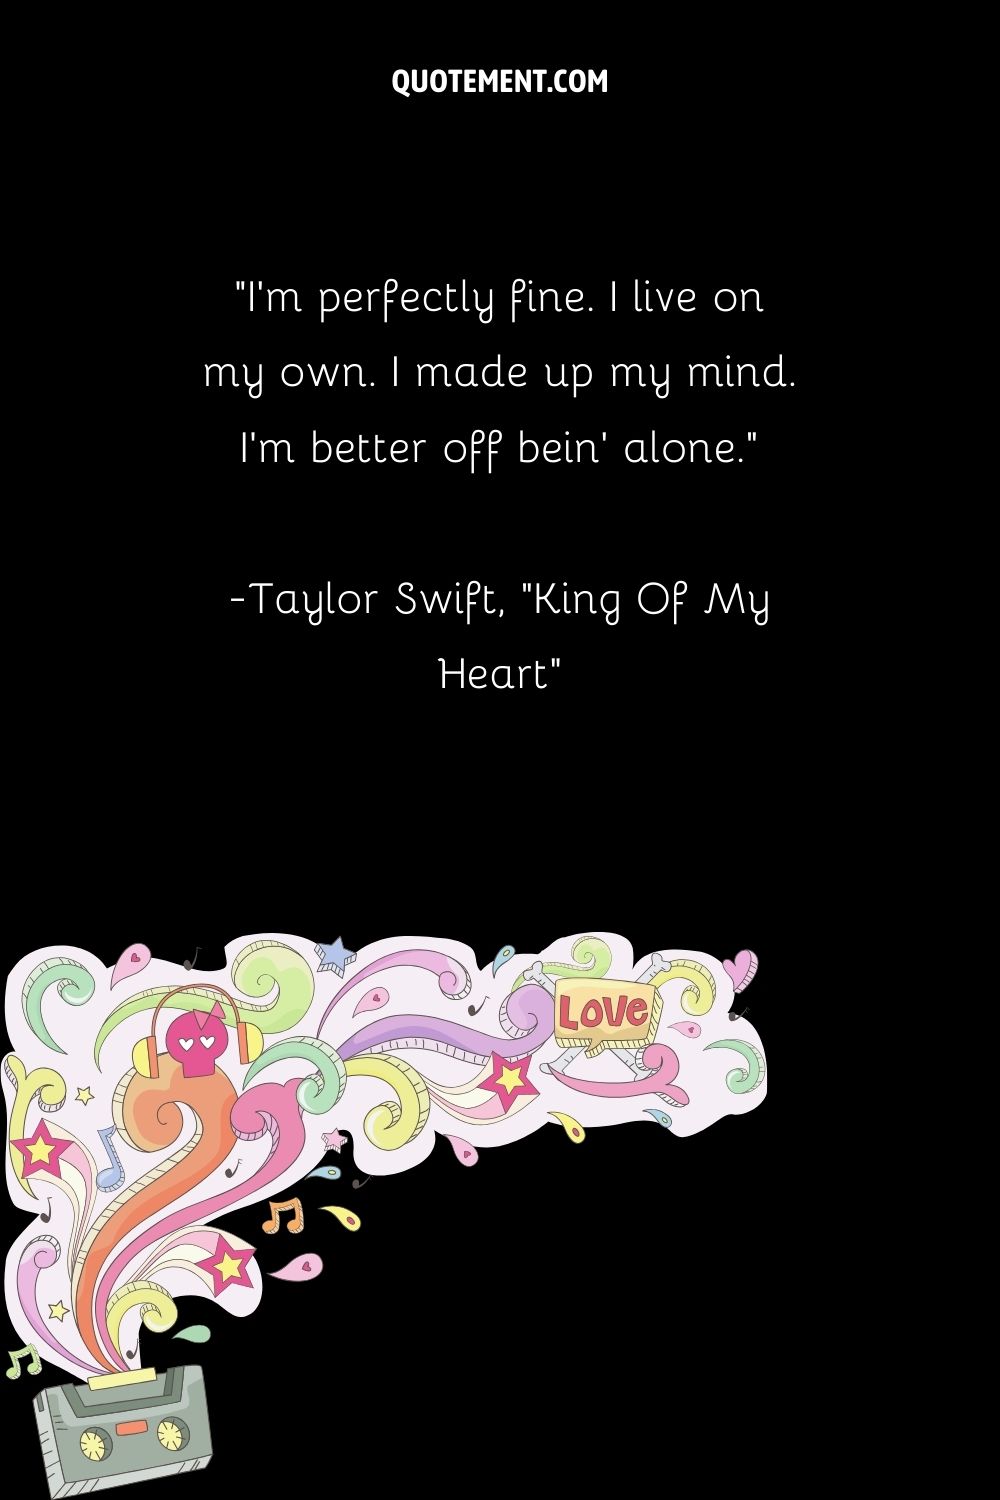 “I’m perfectly fine. I live on my own. I made up my mind. I’m better off bein’ alone.” — Taylor Swift, “King Of My Heart”